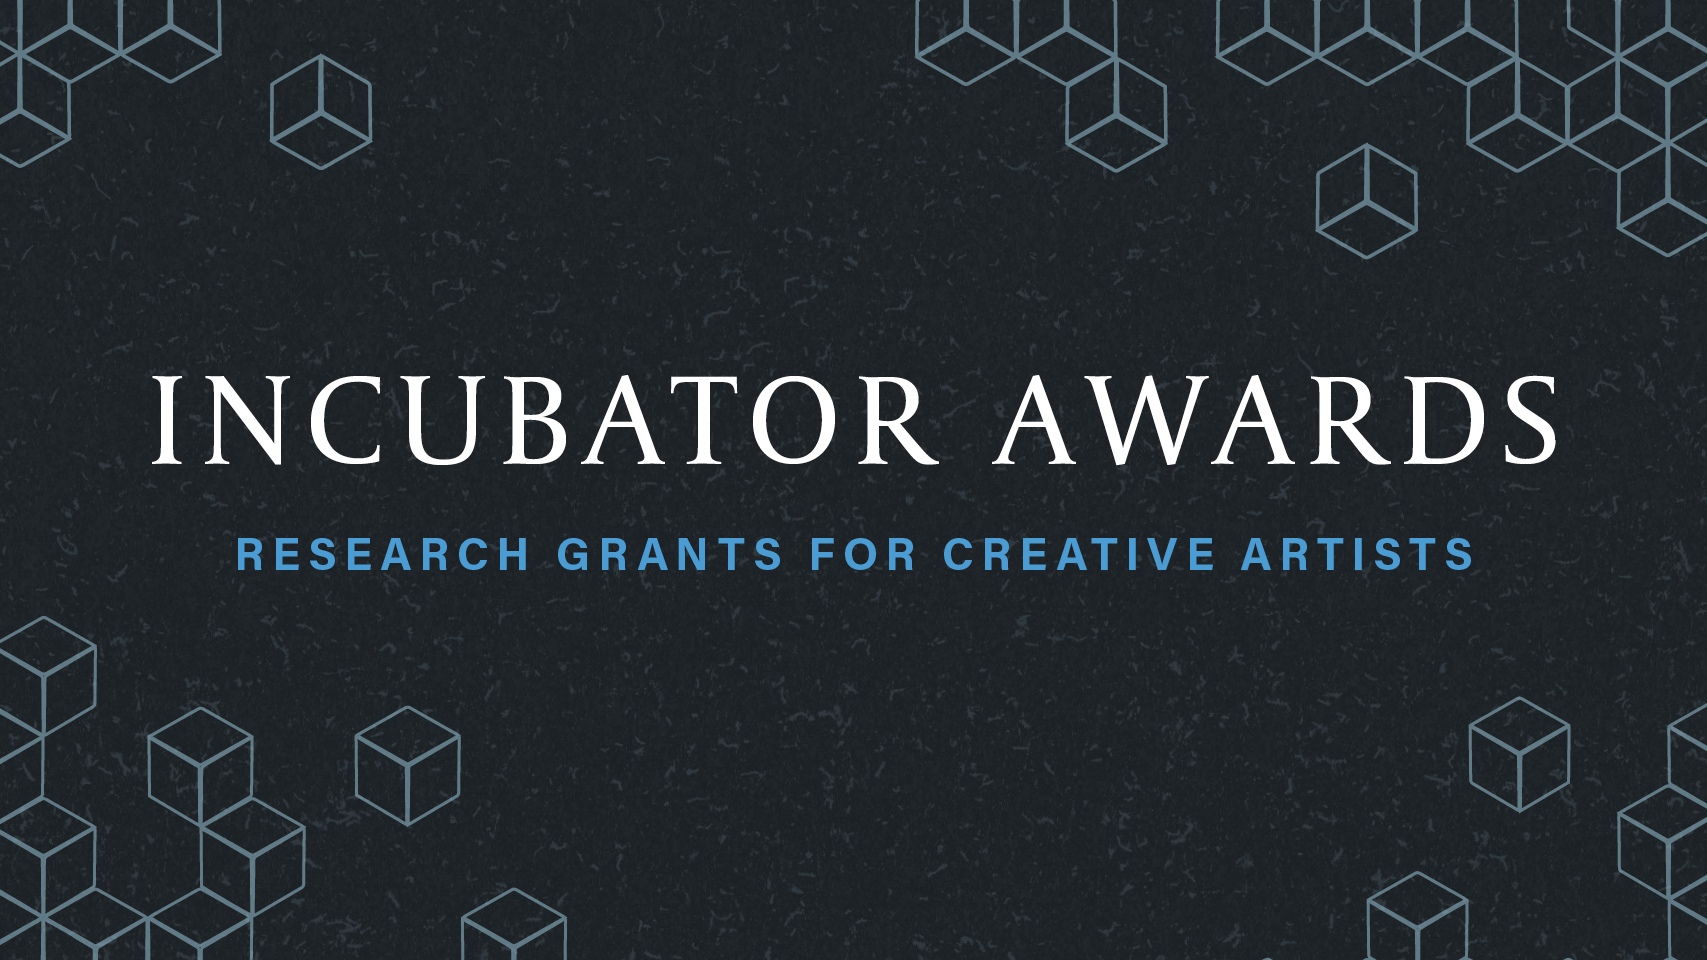 Incubator Awards: Research Grants For Creative Artists. Black background with cube geometric patterns coming in from the corners.